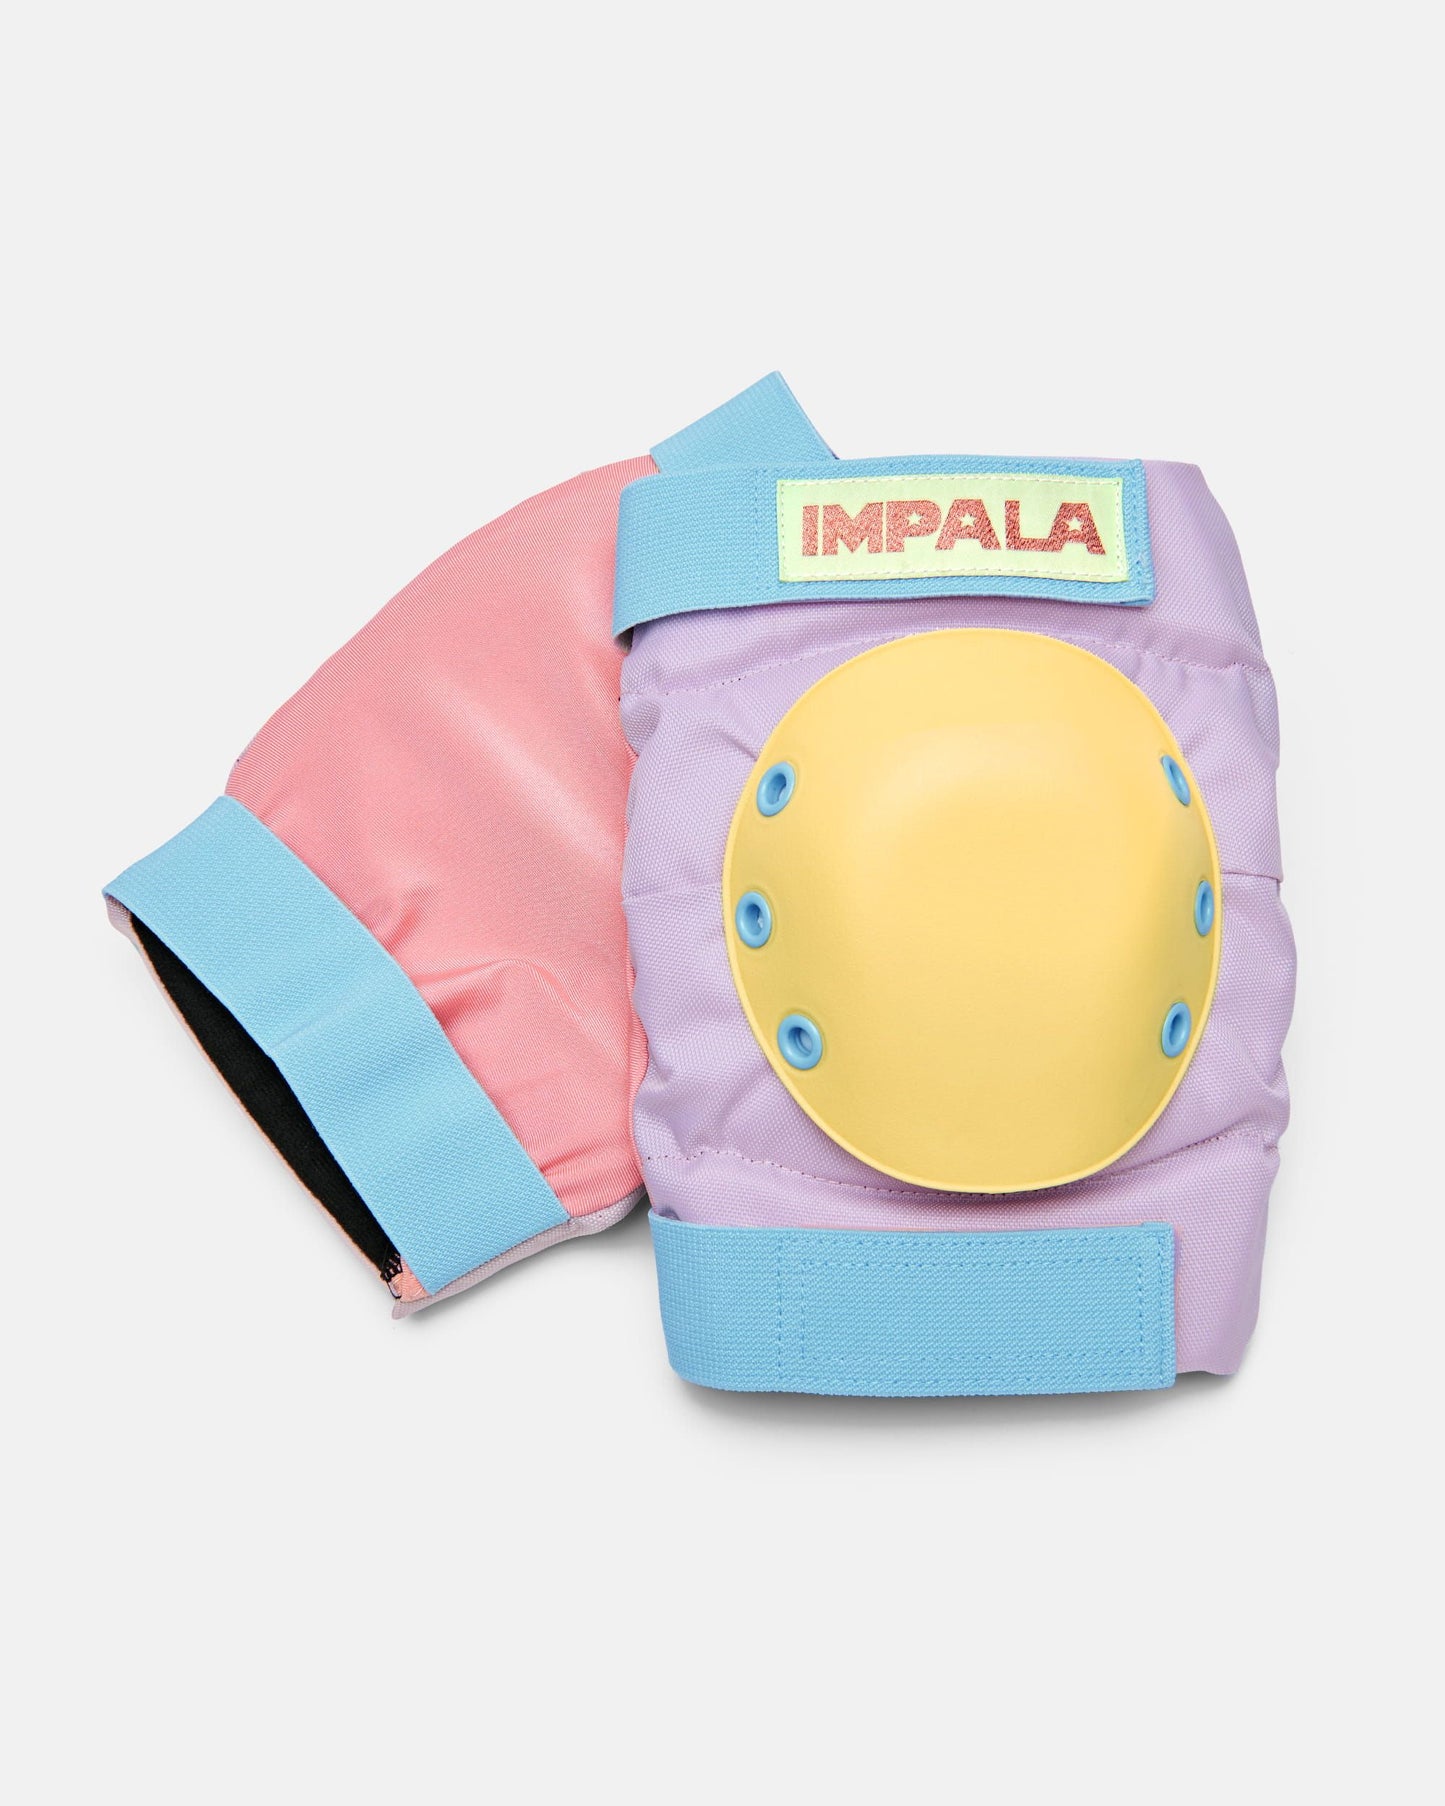 Elbow pads for Impala Protective Set - Pastel Block